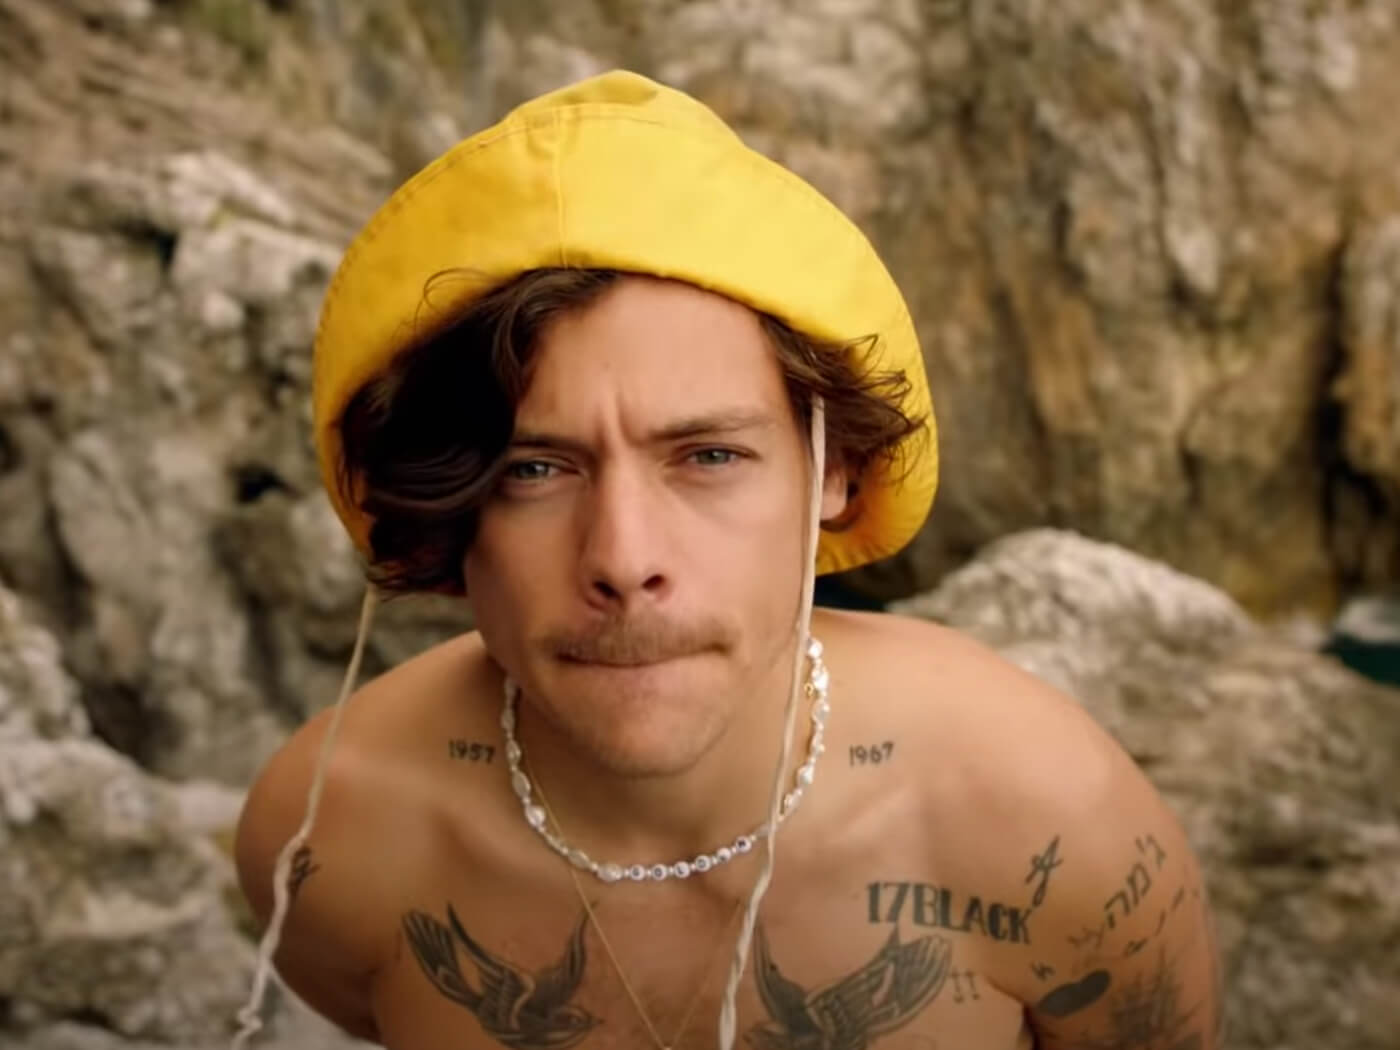 Watch Harry Styles run for his life in video for “Golden”